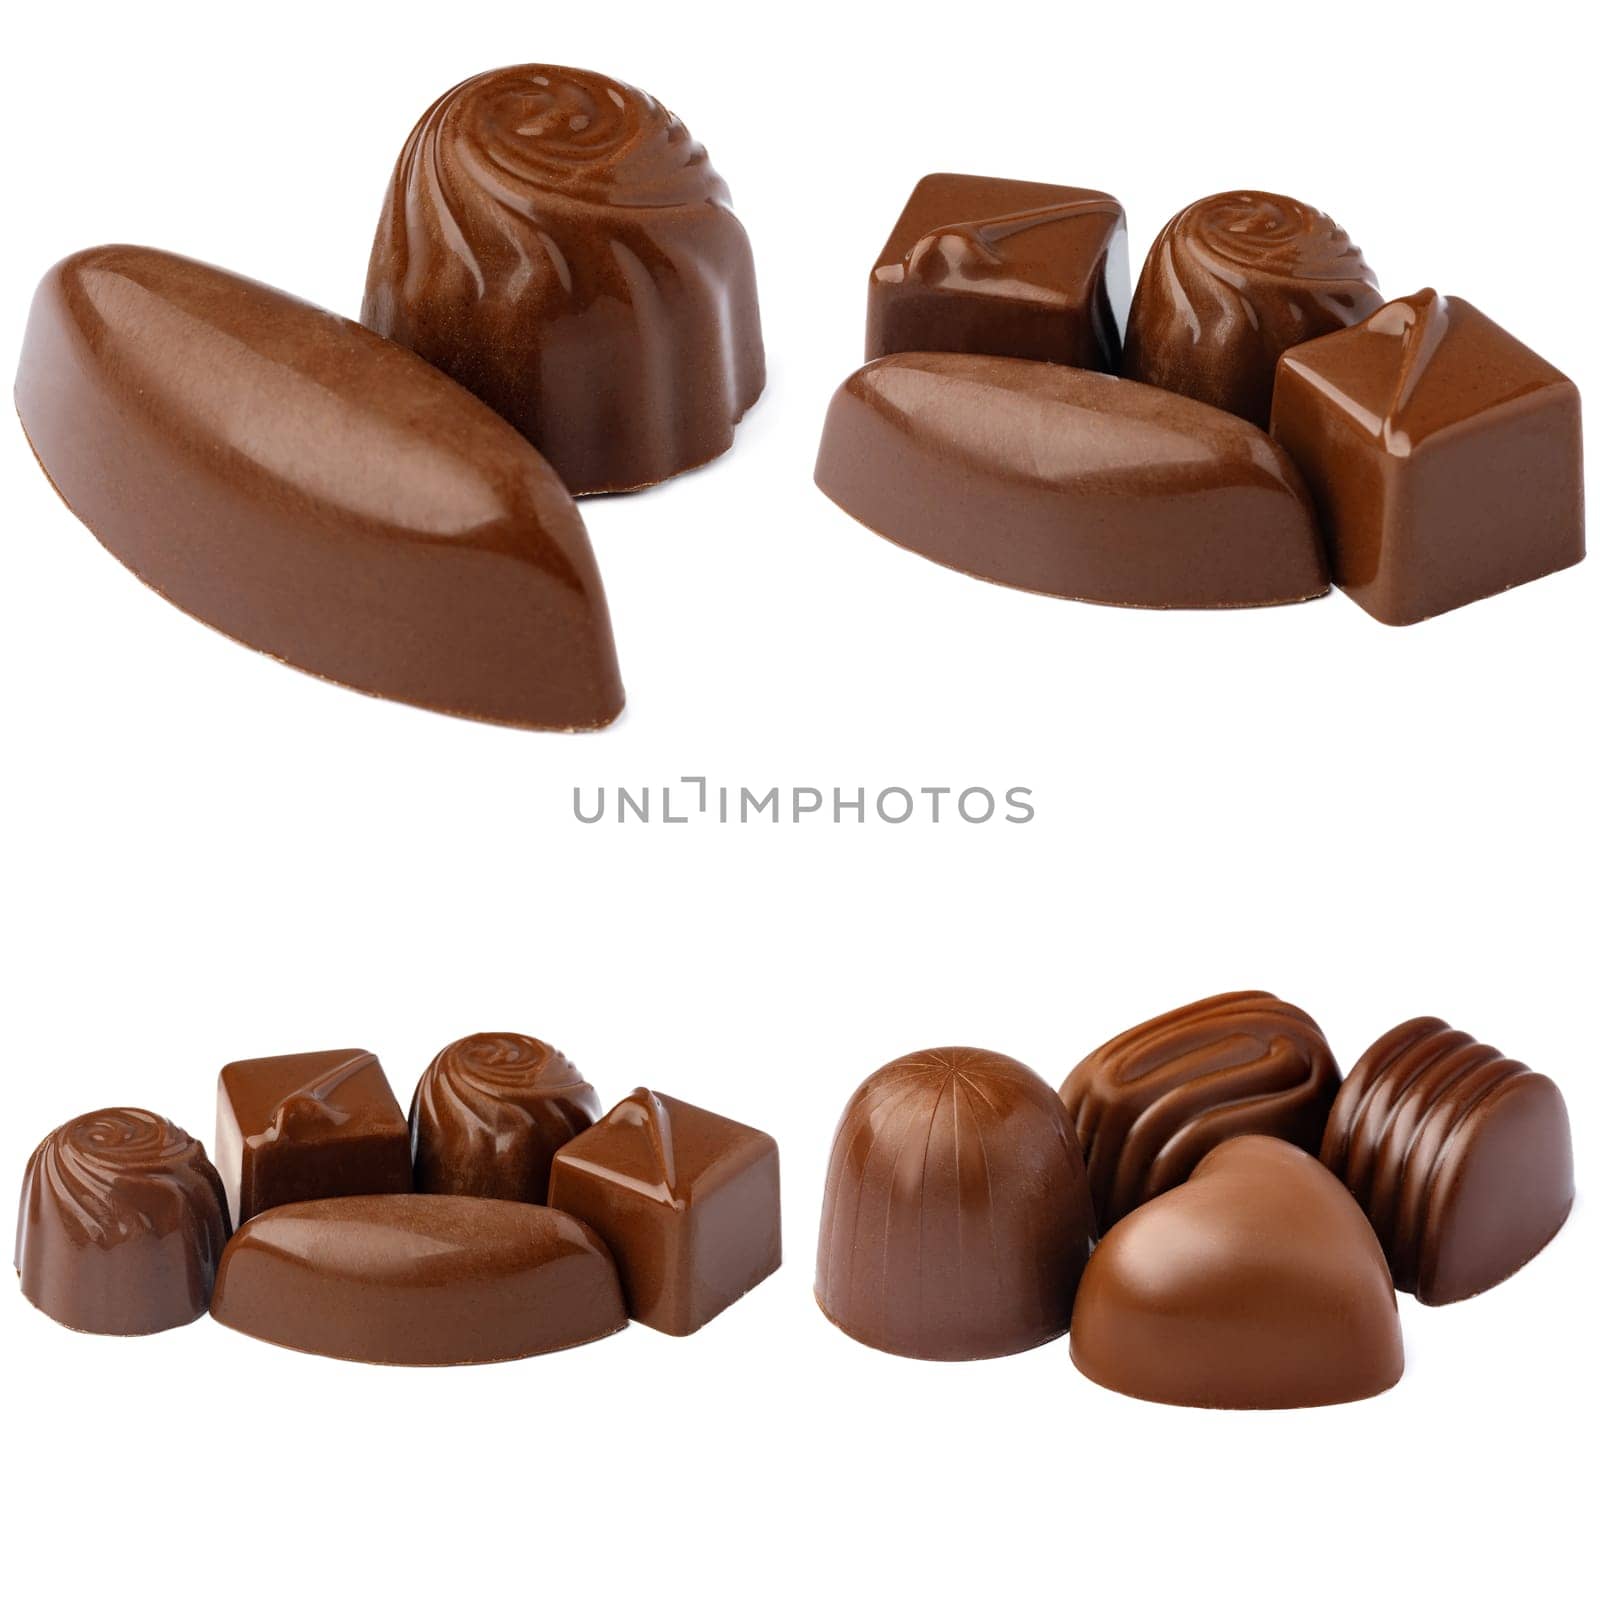 Chocolate candies collection collage isolated on white background